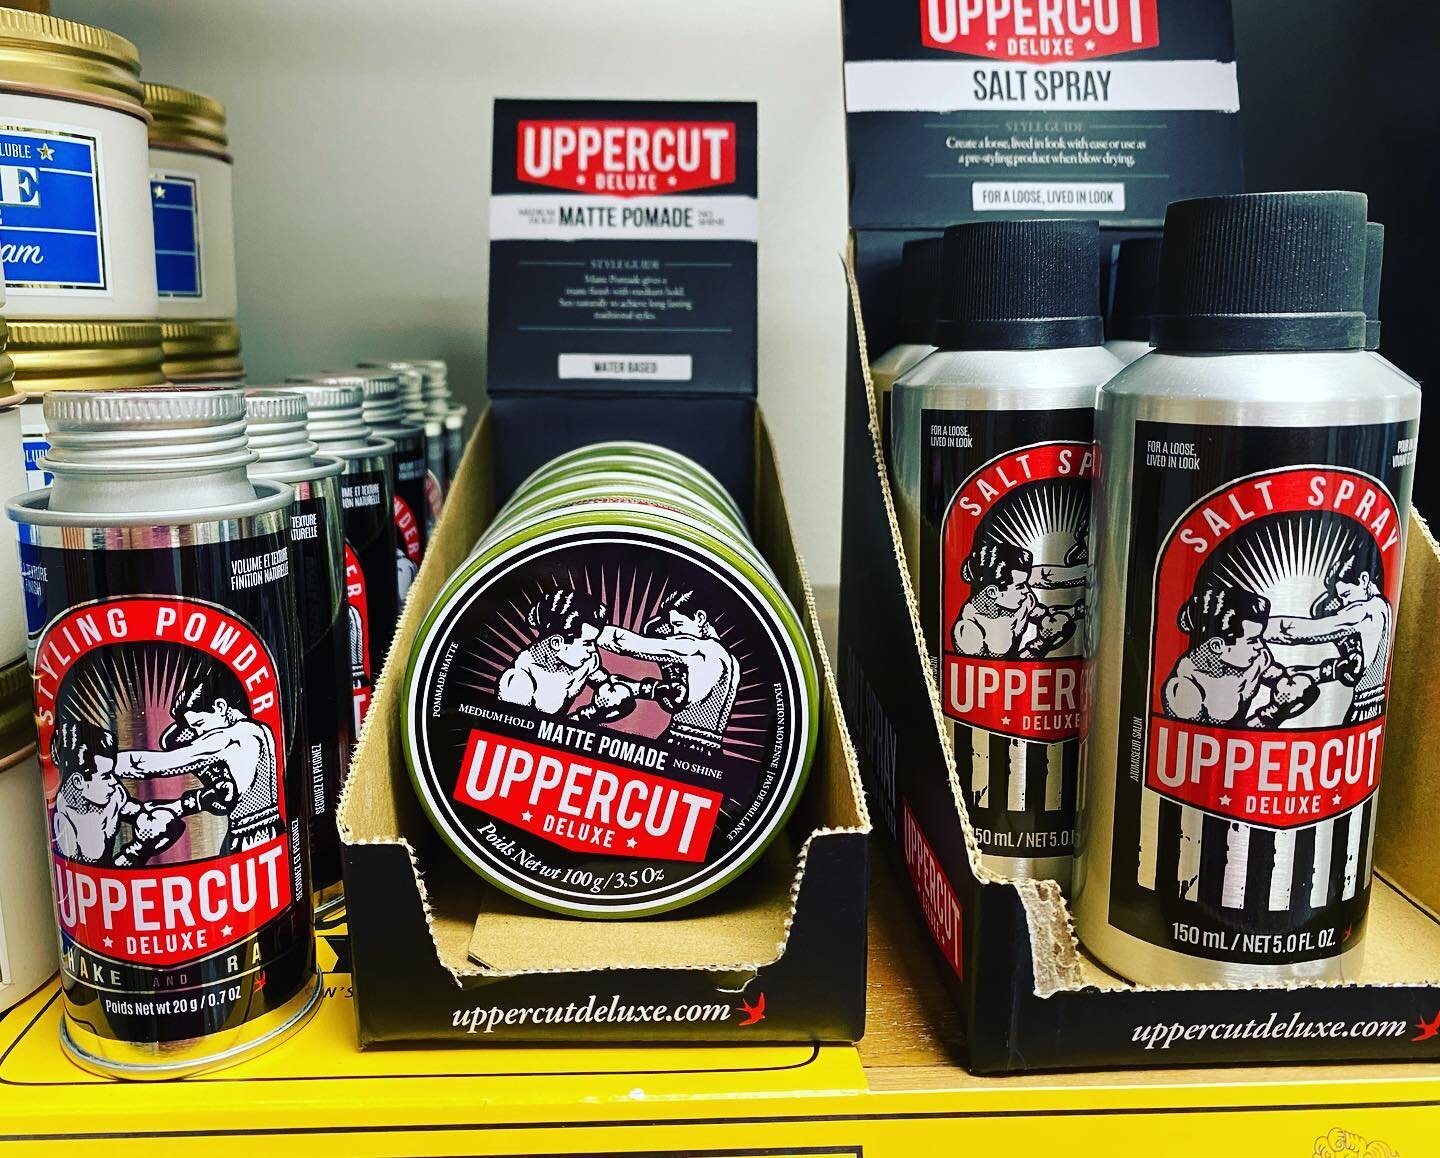 @uppercutdeluxe is in the house